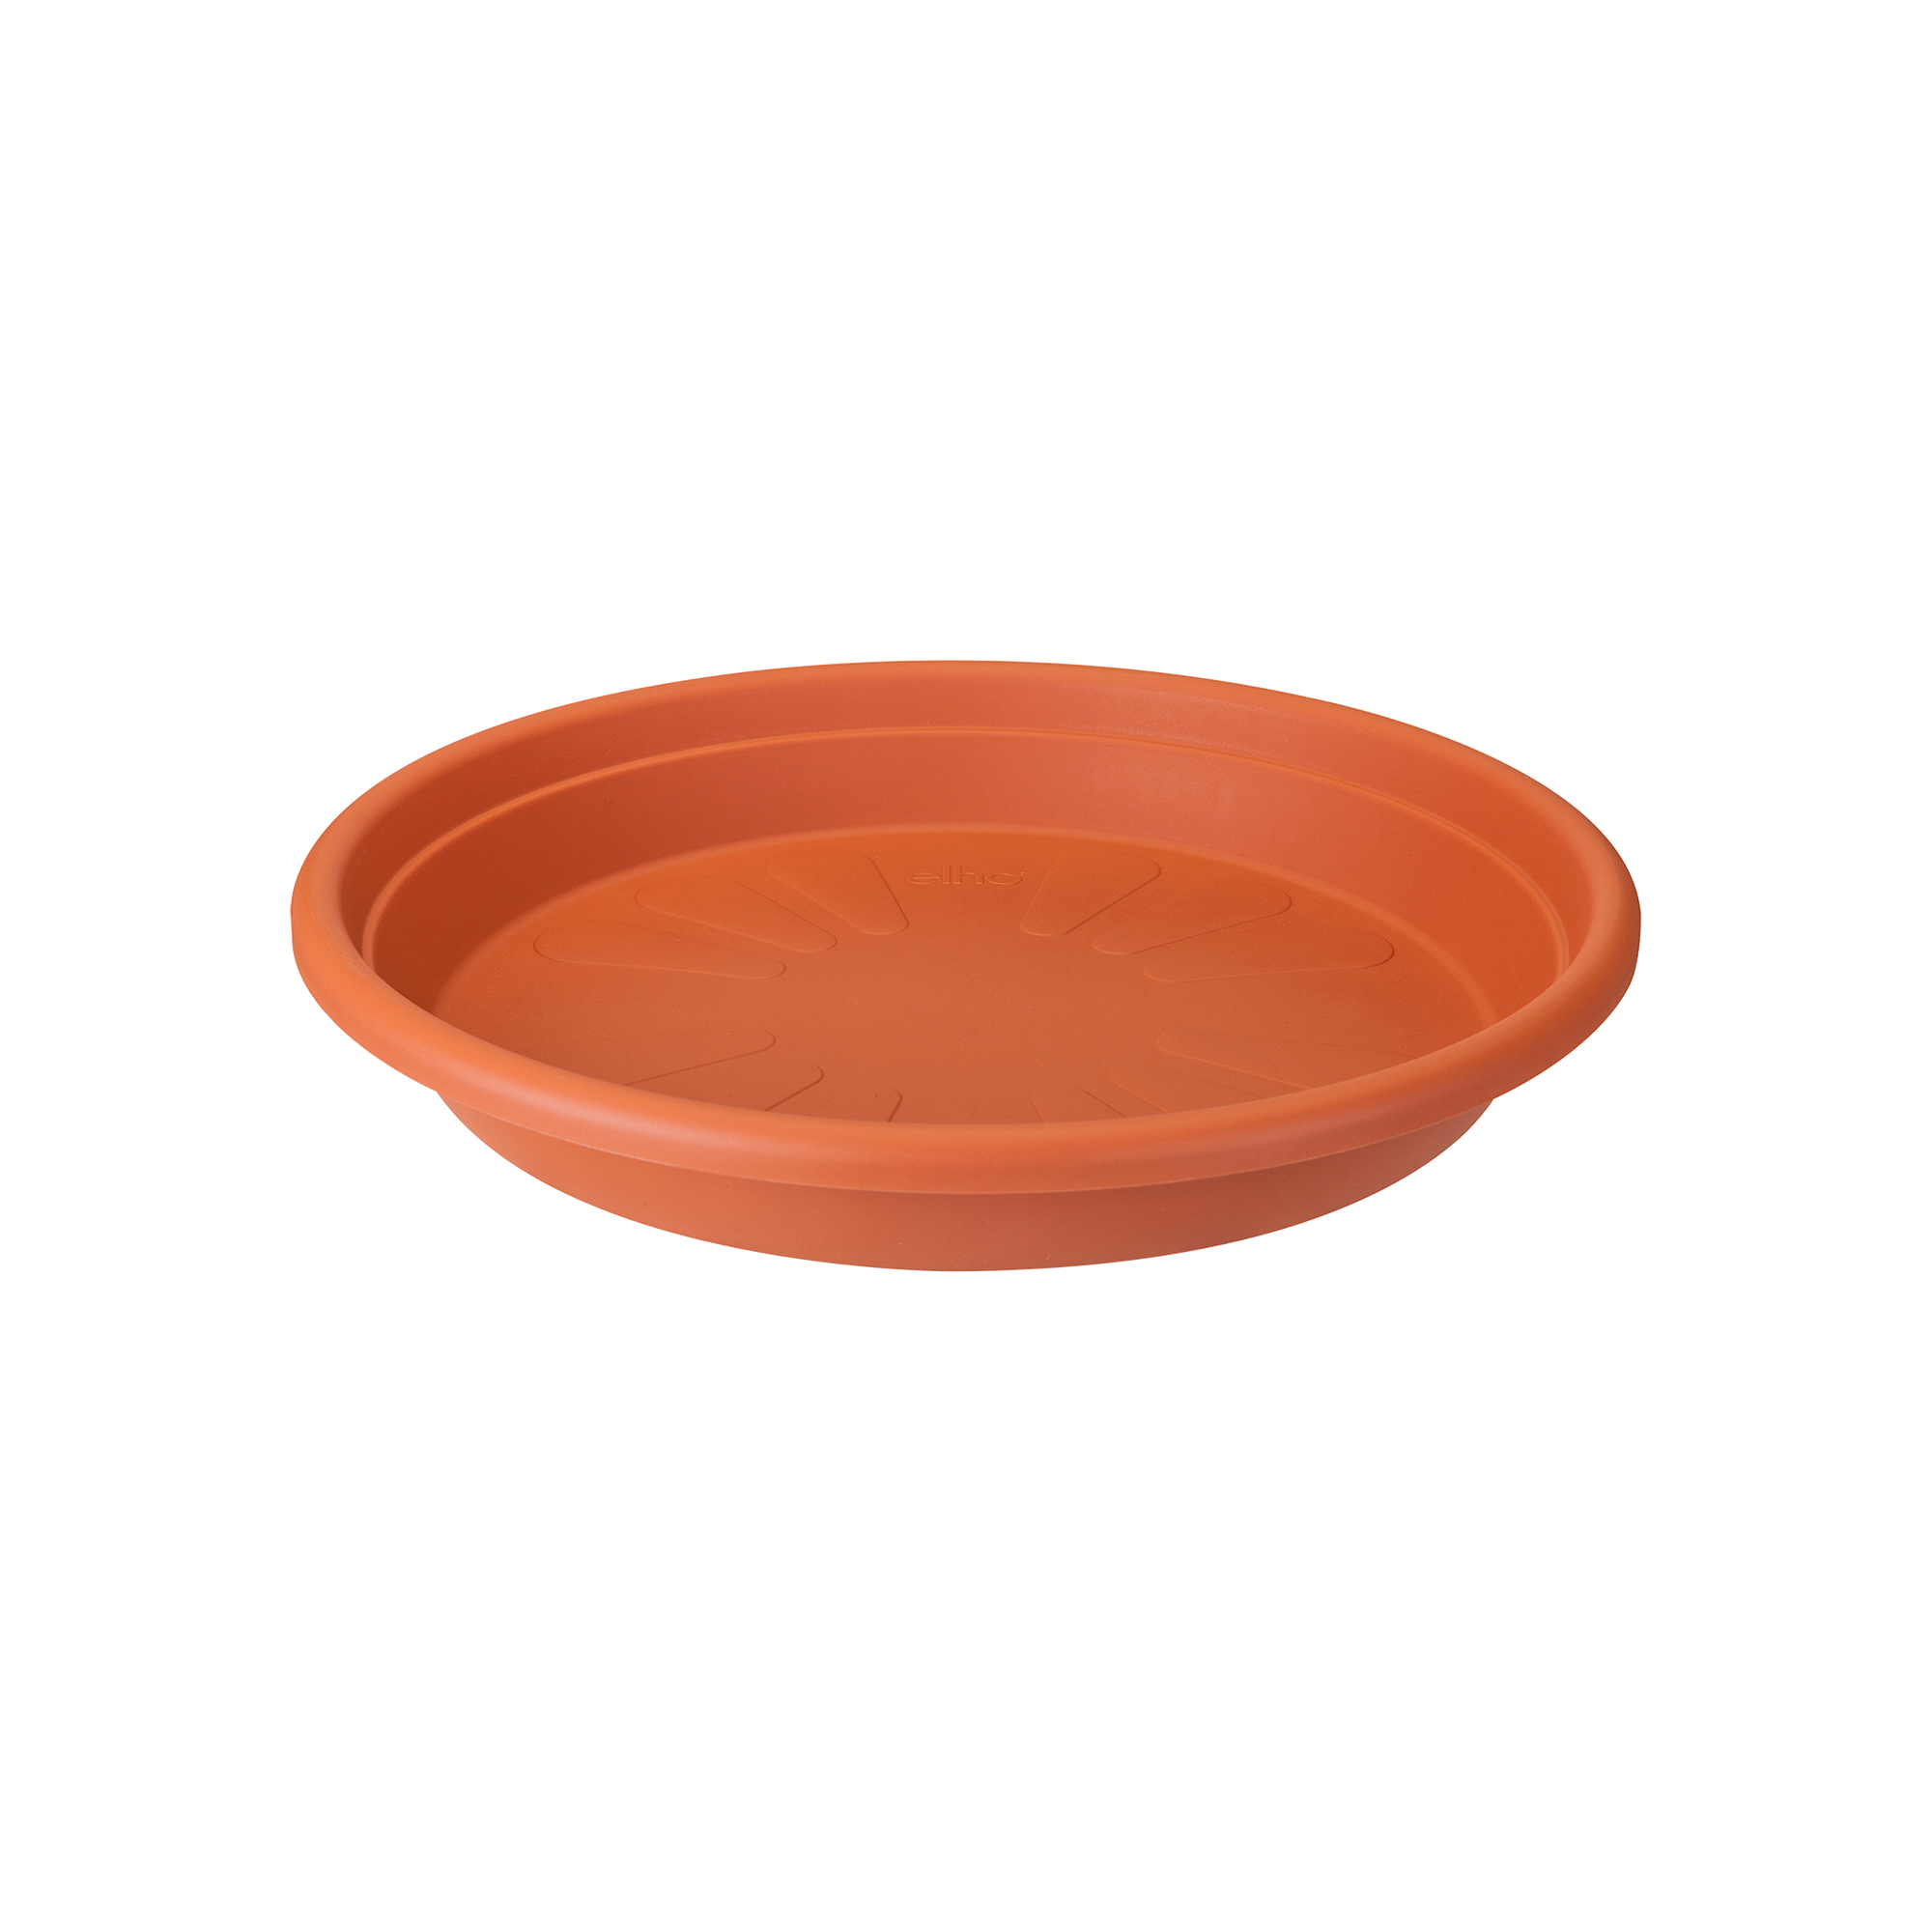 terra universal saucer room 48cm nature elho® to - Give - round